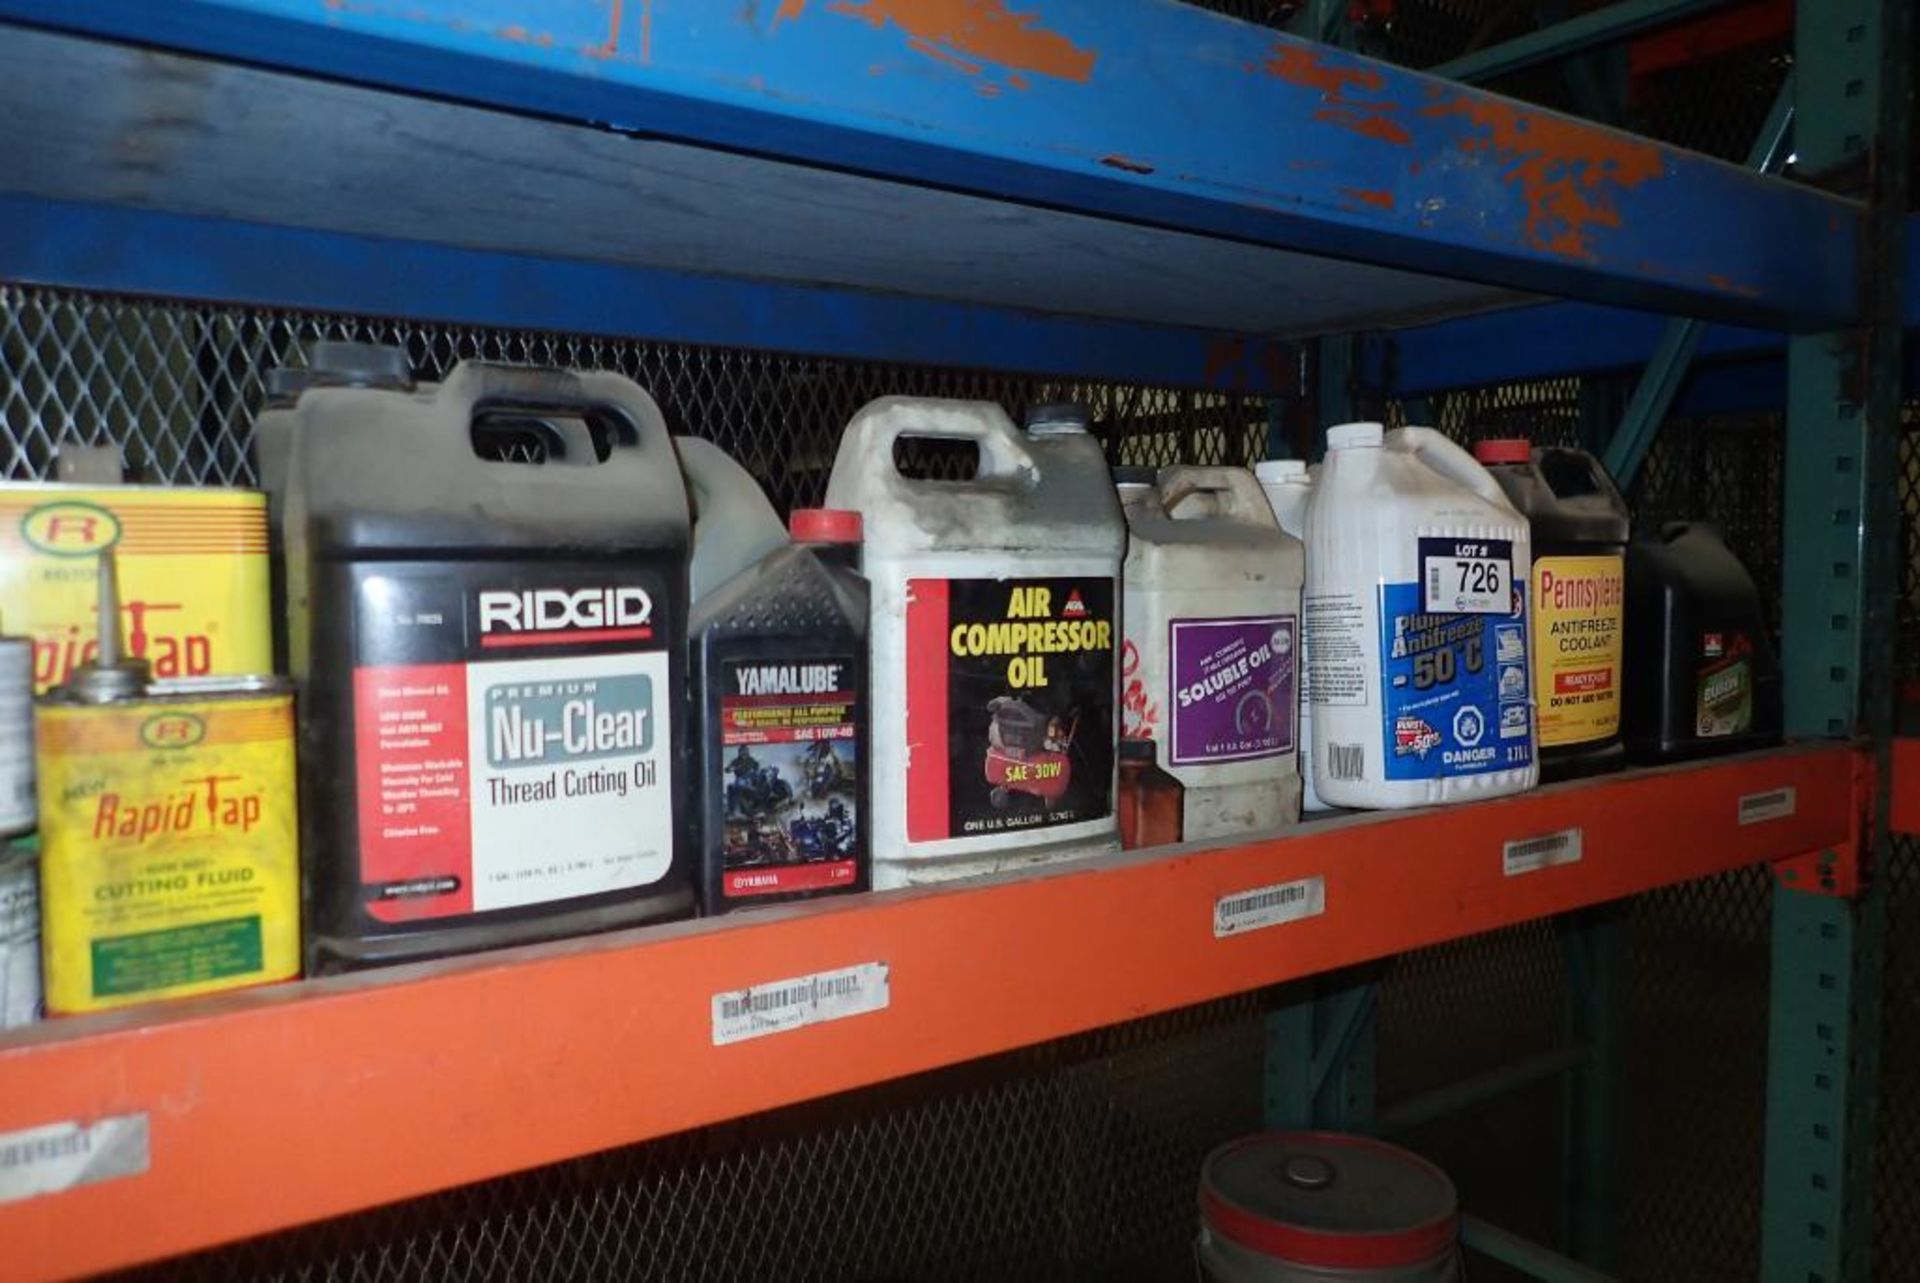 Lot of Asst. Shop Fluid including Oil, Antifreeze, Cutting Oil, Adhesive, etc. - Image 4 of 6